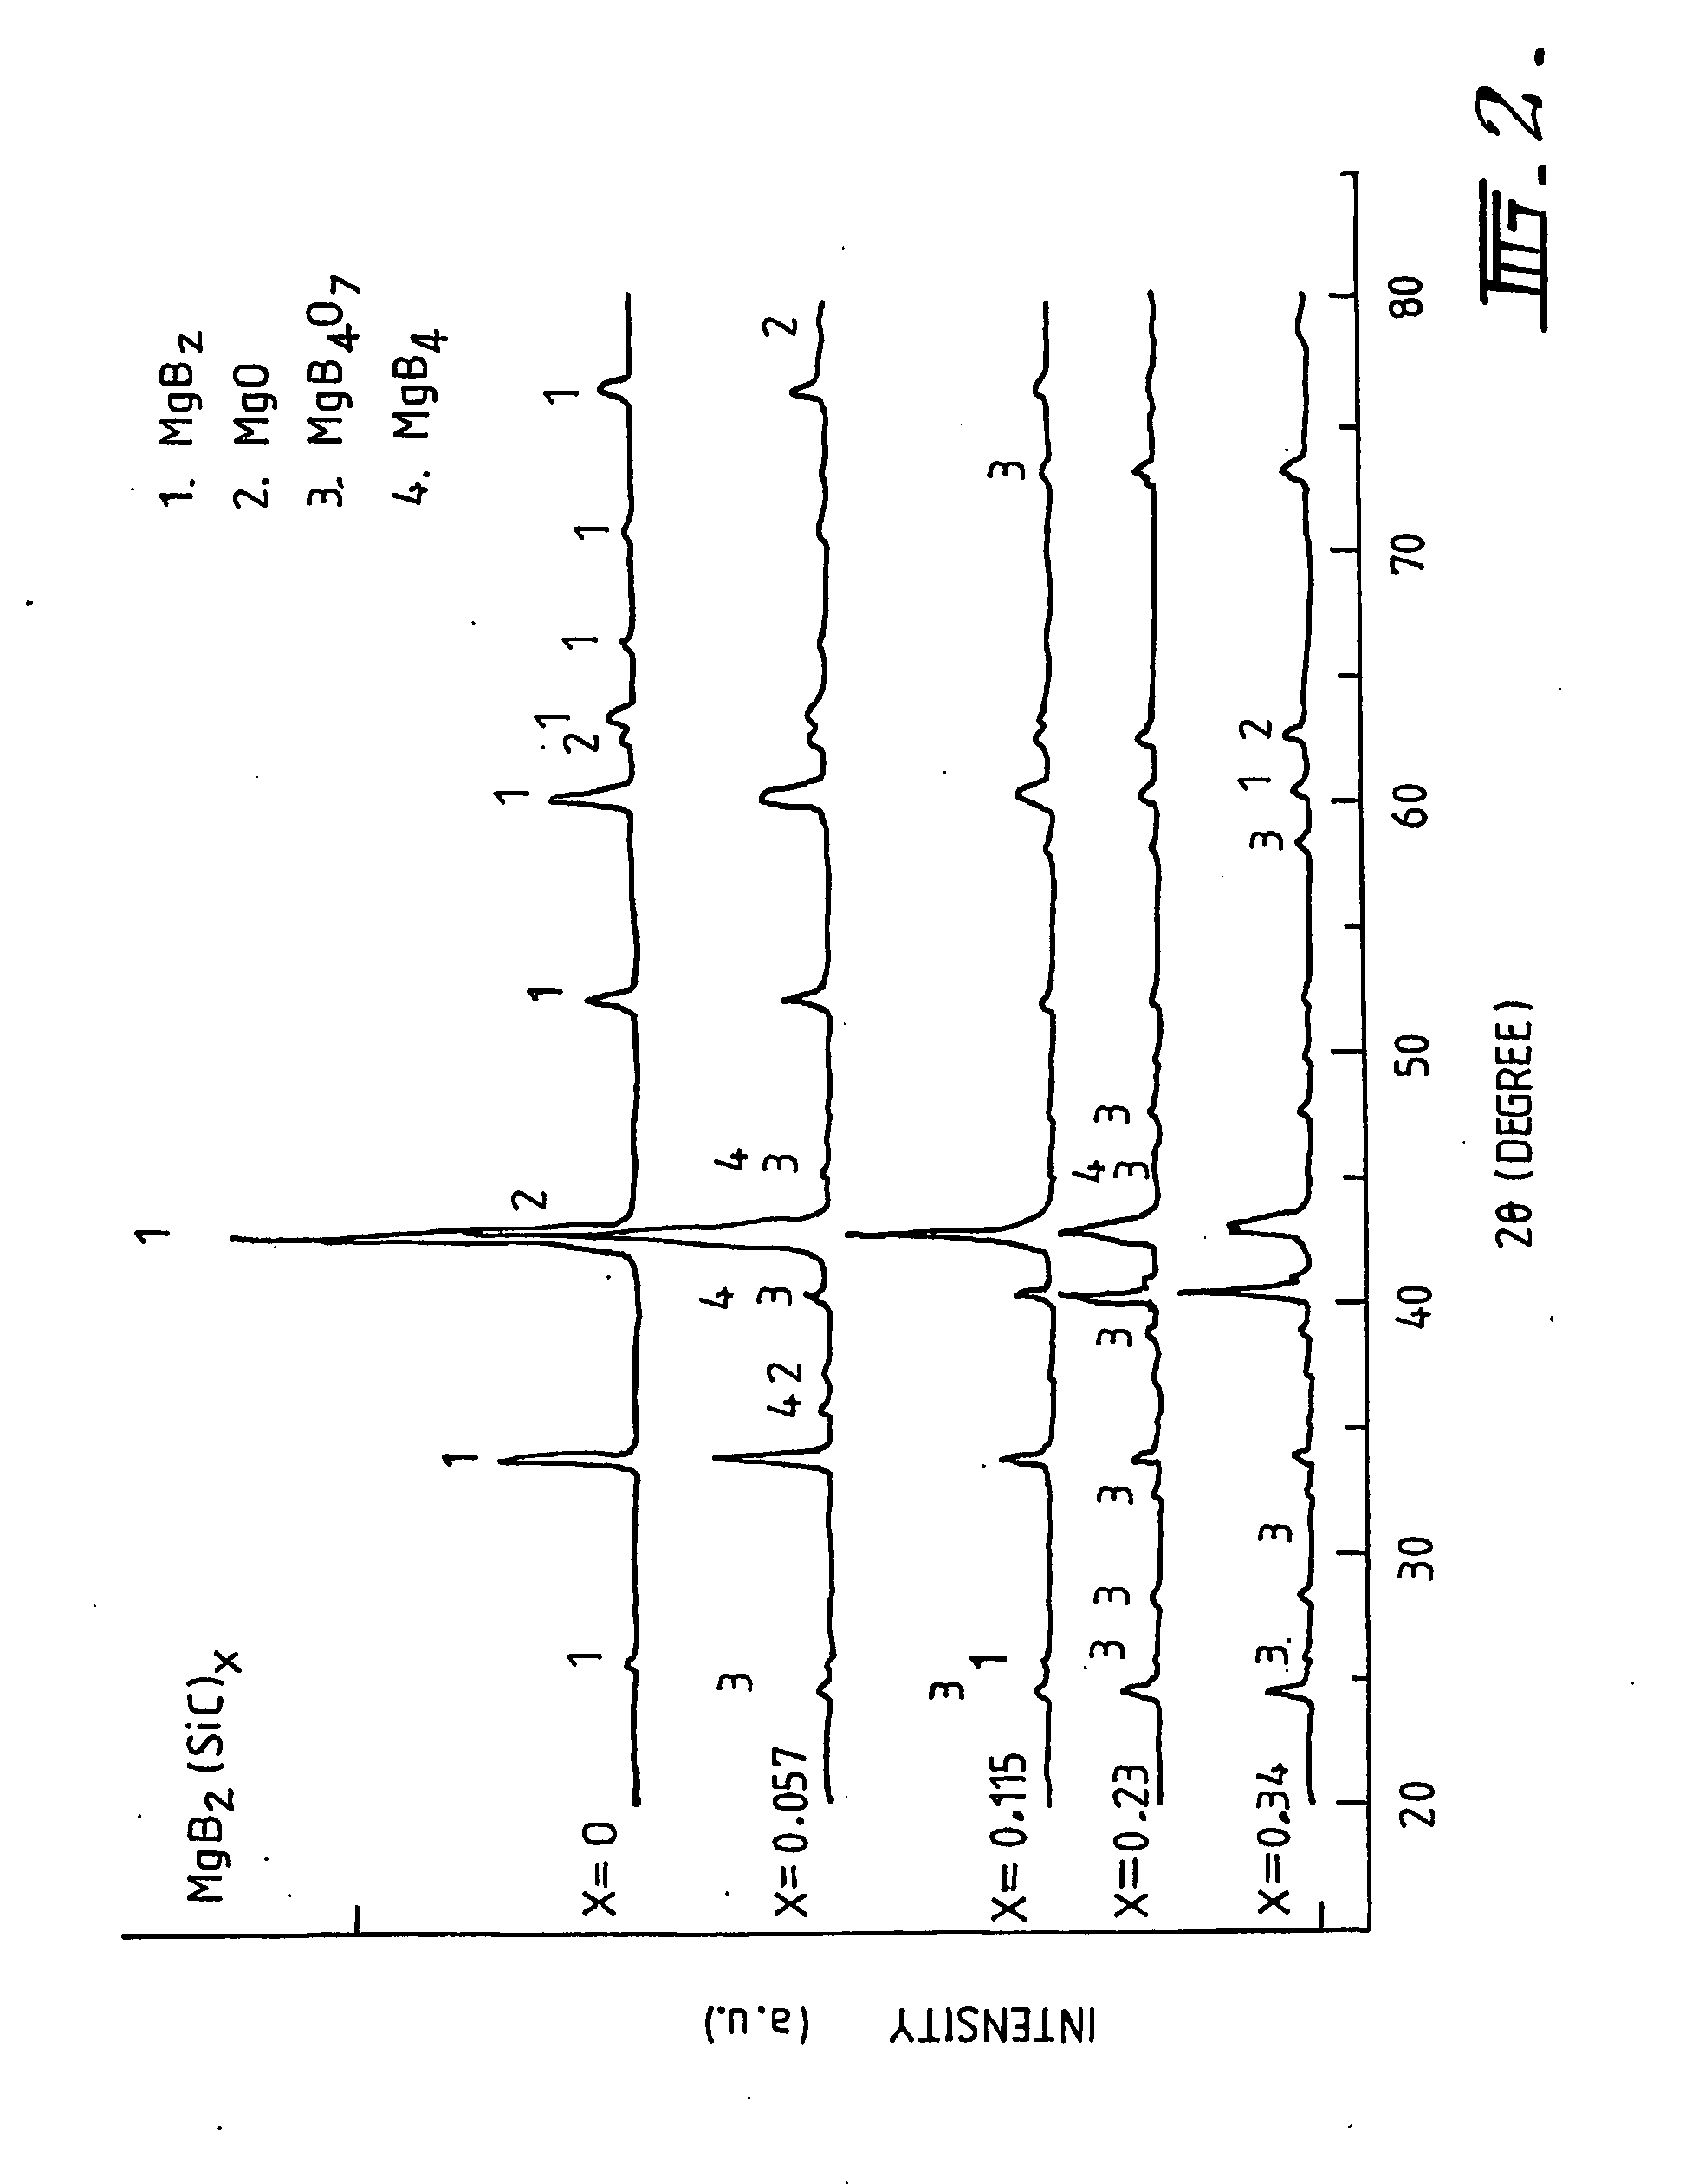 Superconducting material and method of synthesis